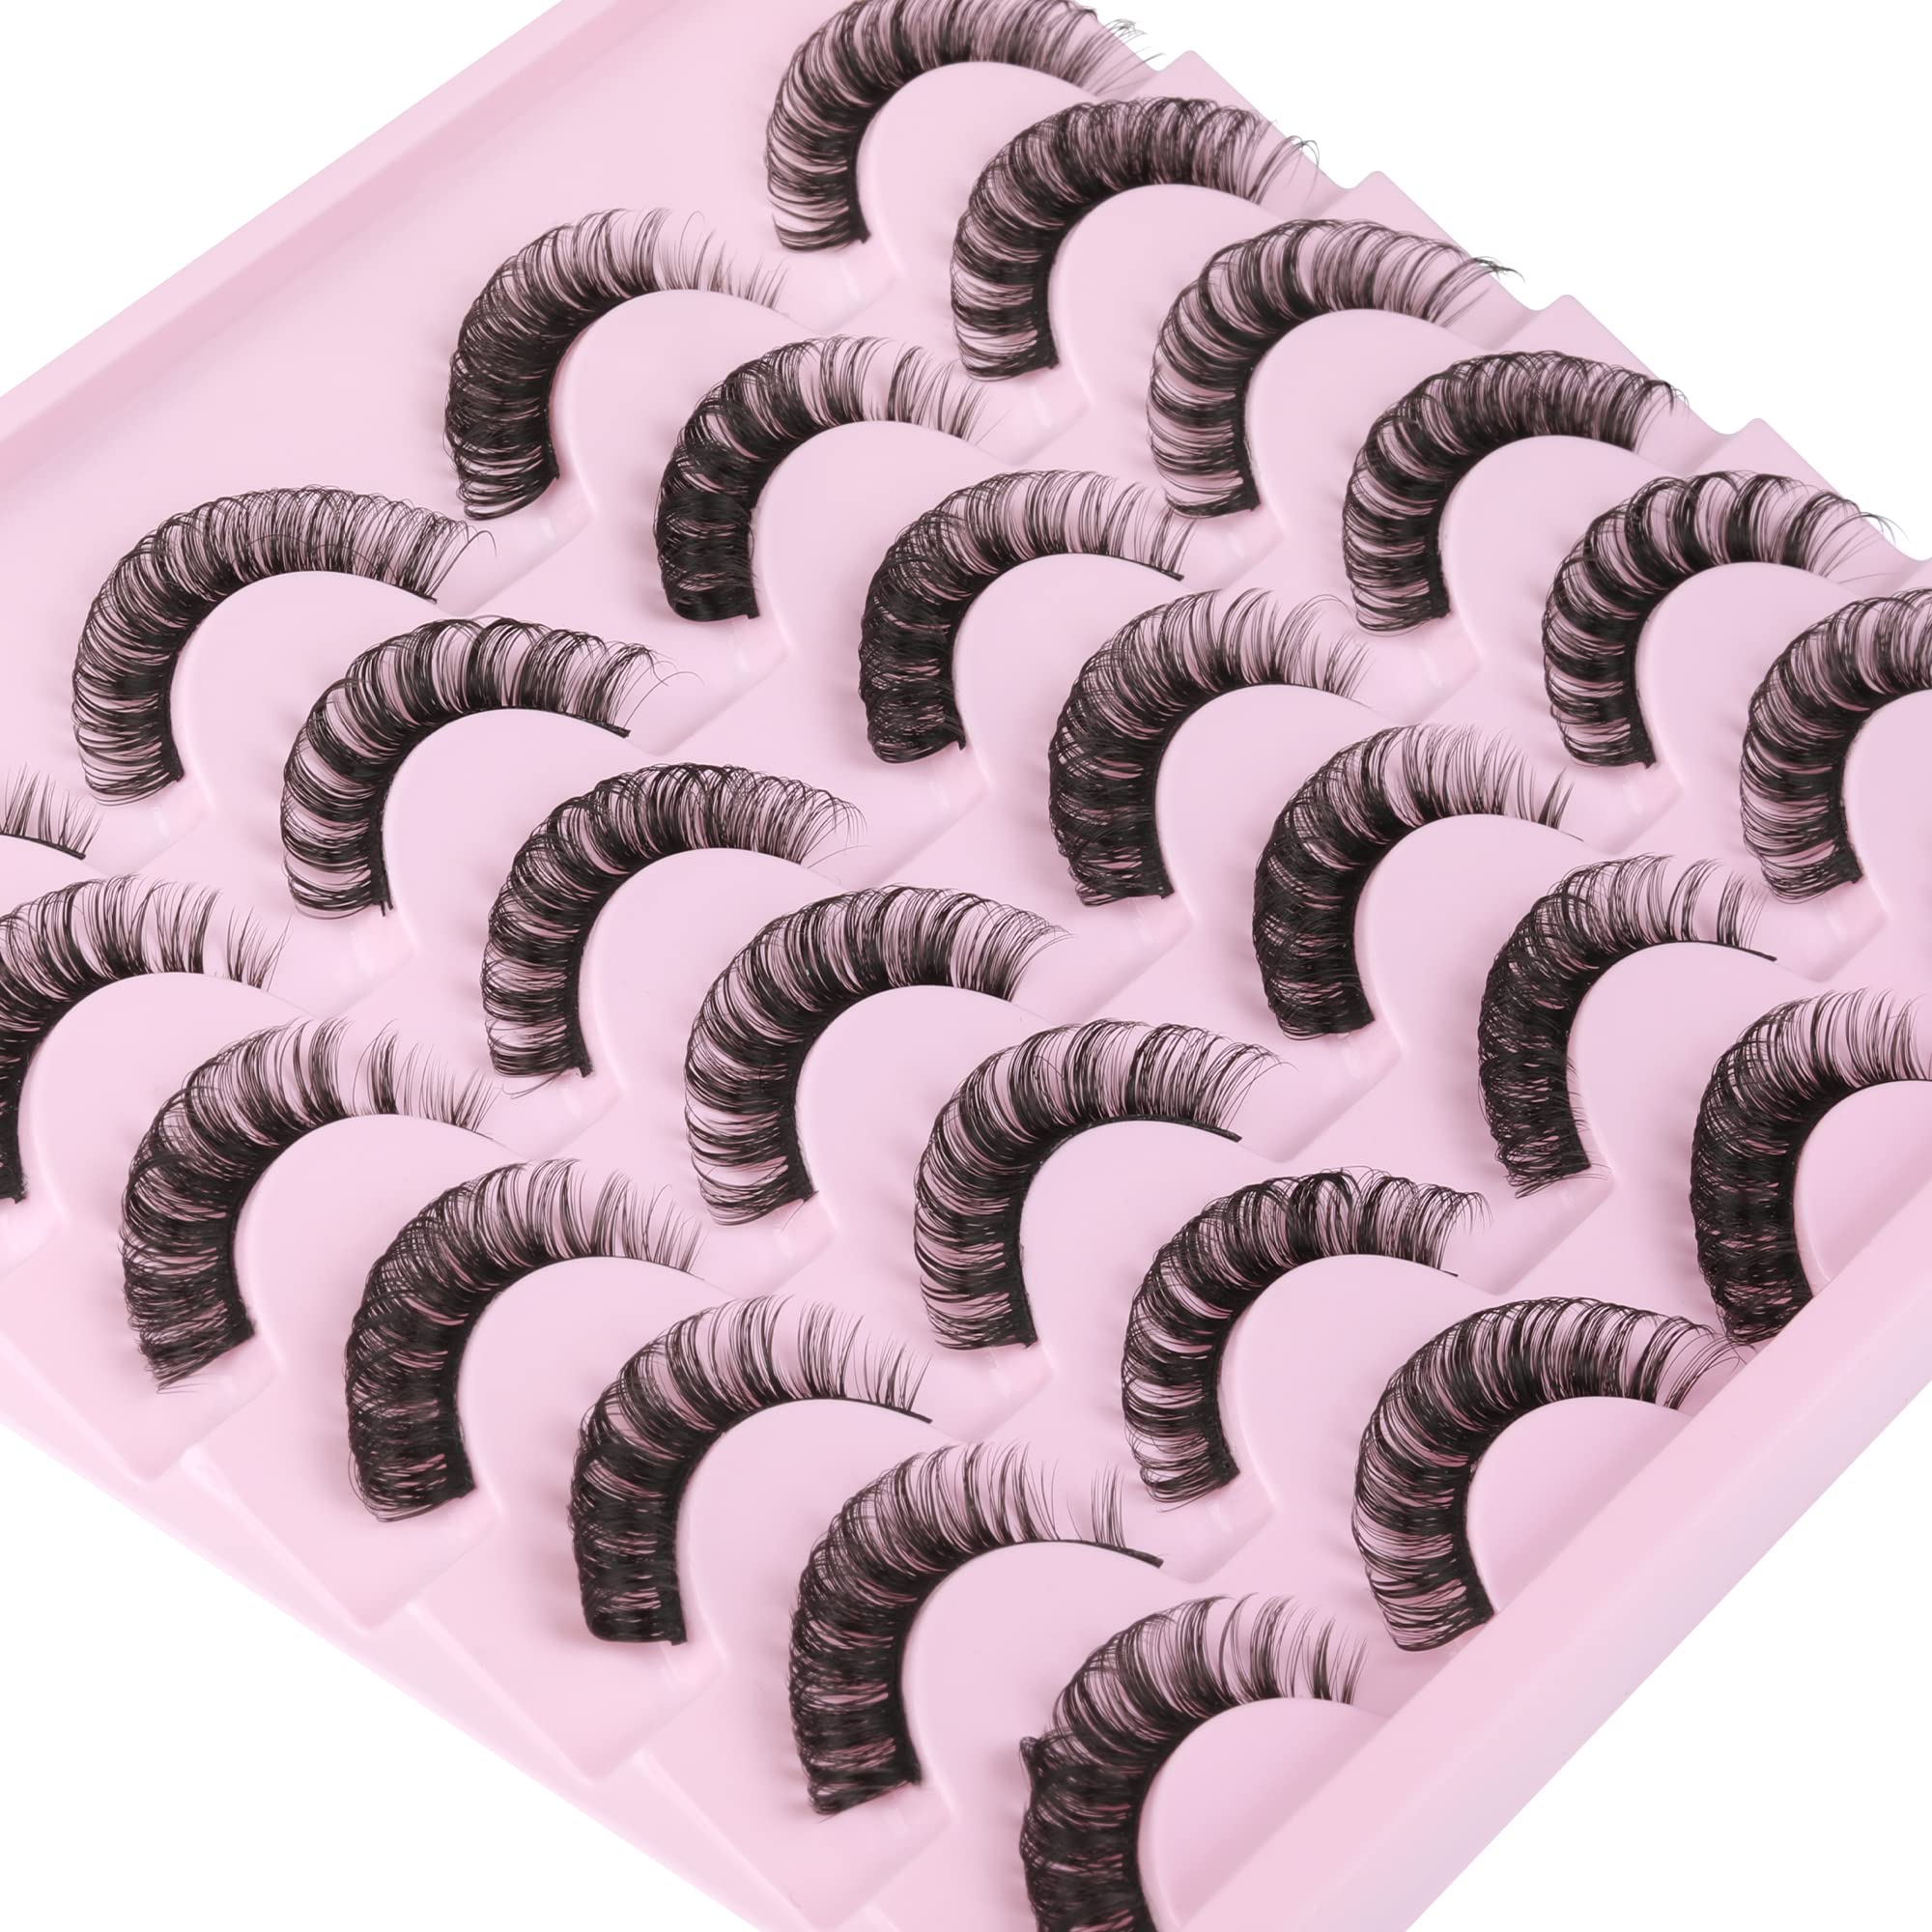 wiwoseo False Eyelashes Russian Strip Lashes D Curly Wispy Natural Lashes 3D Effect Crossing 16MM Fake Eyelashes 14 Pairs Pack